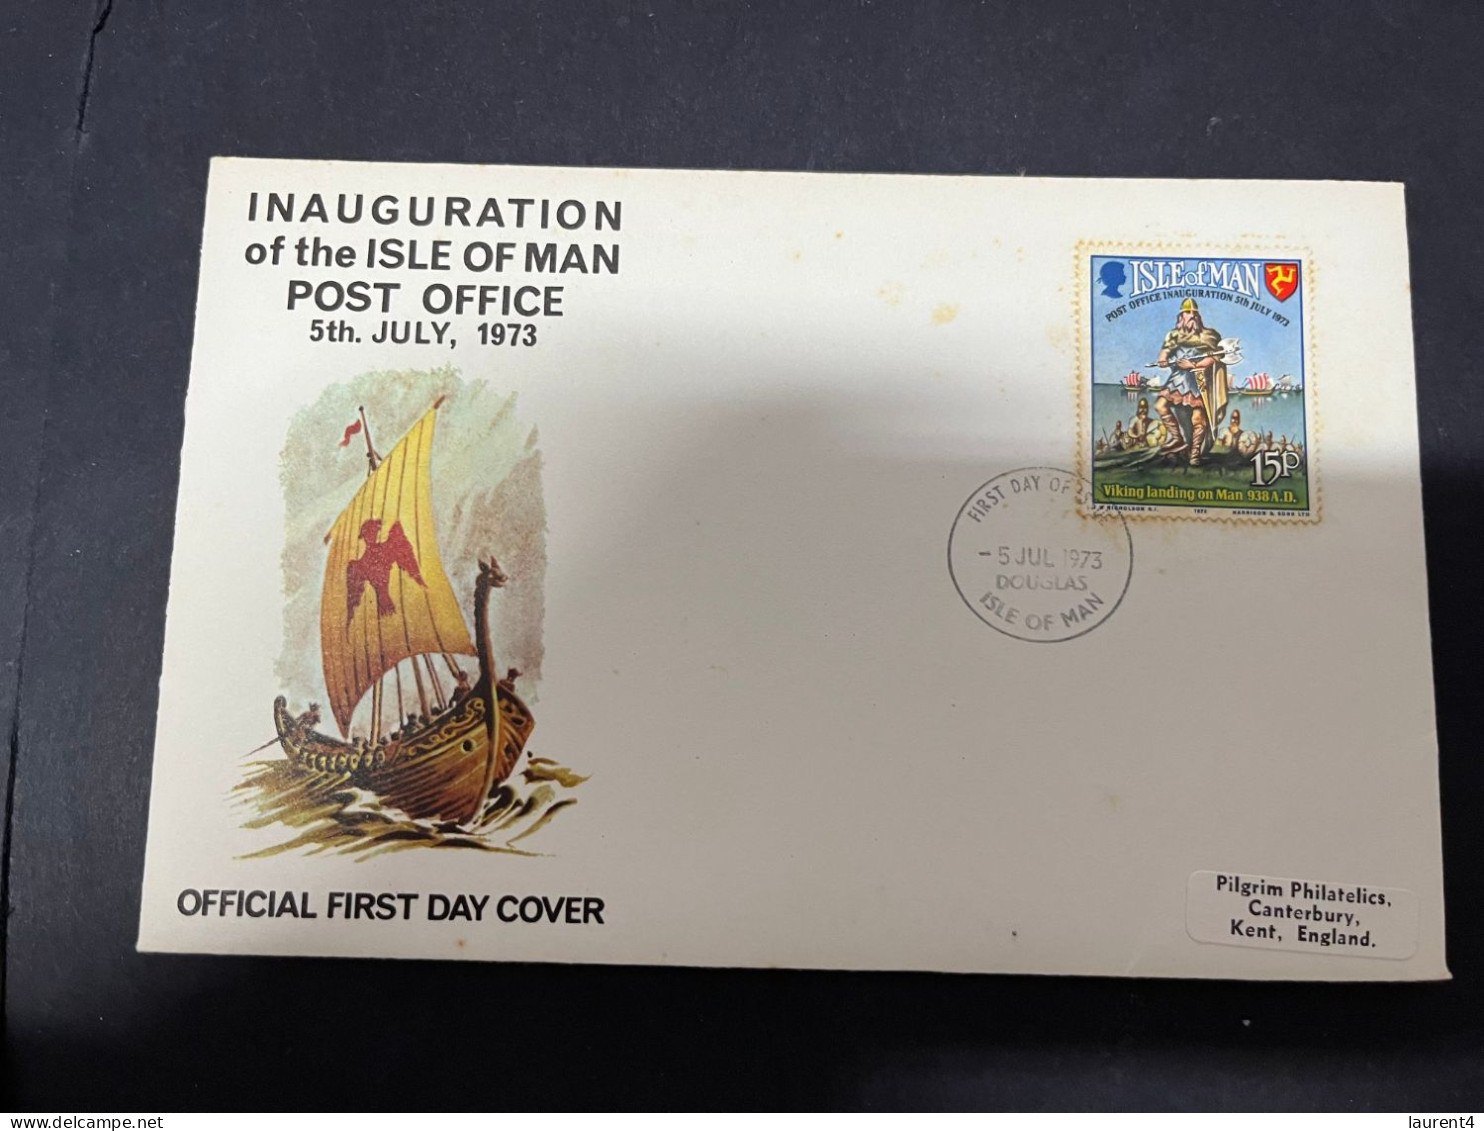 8-5-2024 (4 Z 29)  FDC (Isle Of Man) Europa 1973 - Post Office Inauguaration ( Some Rust ) (19 X 10,5 Cm) With Insert - Isle Of Man